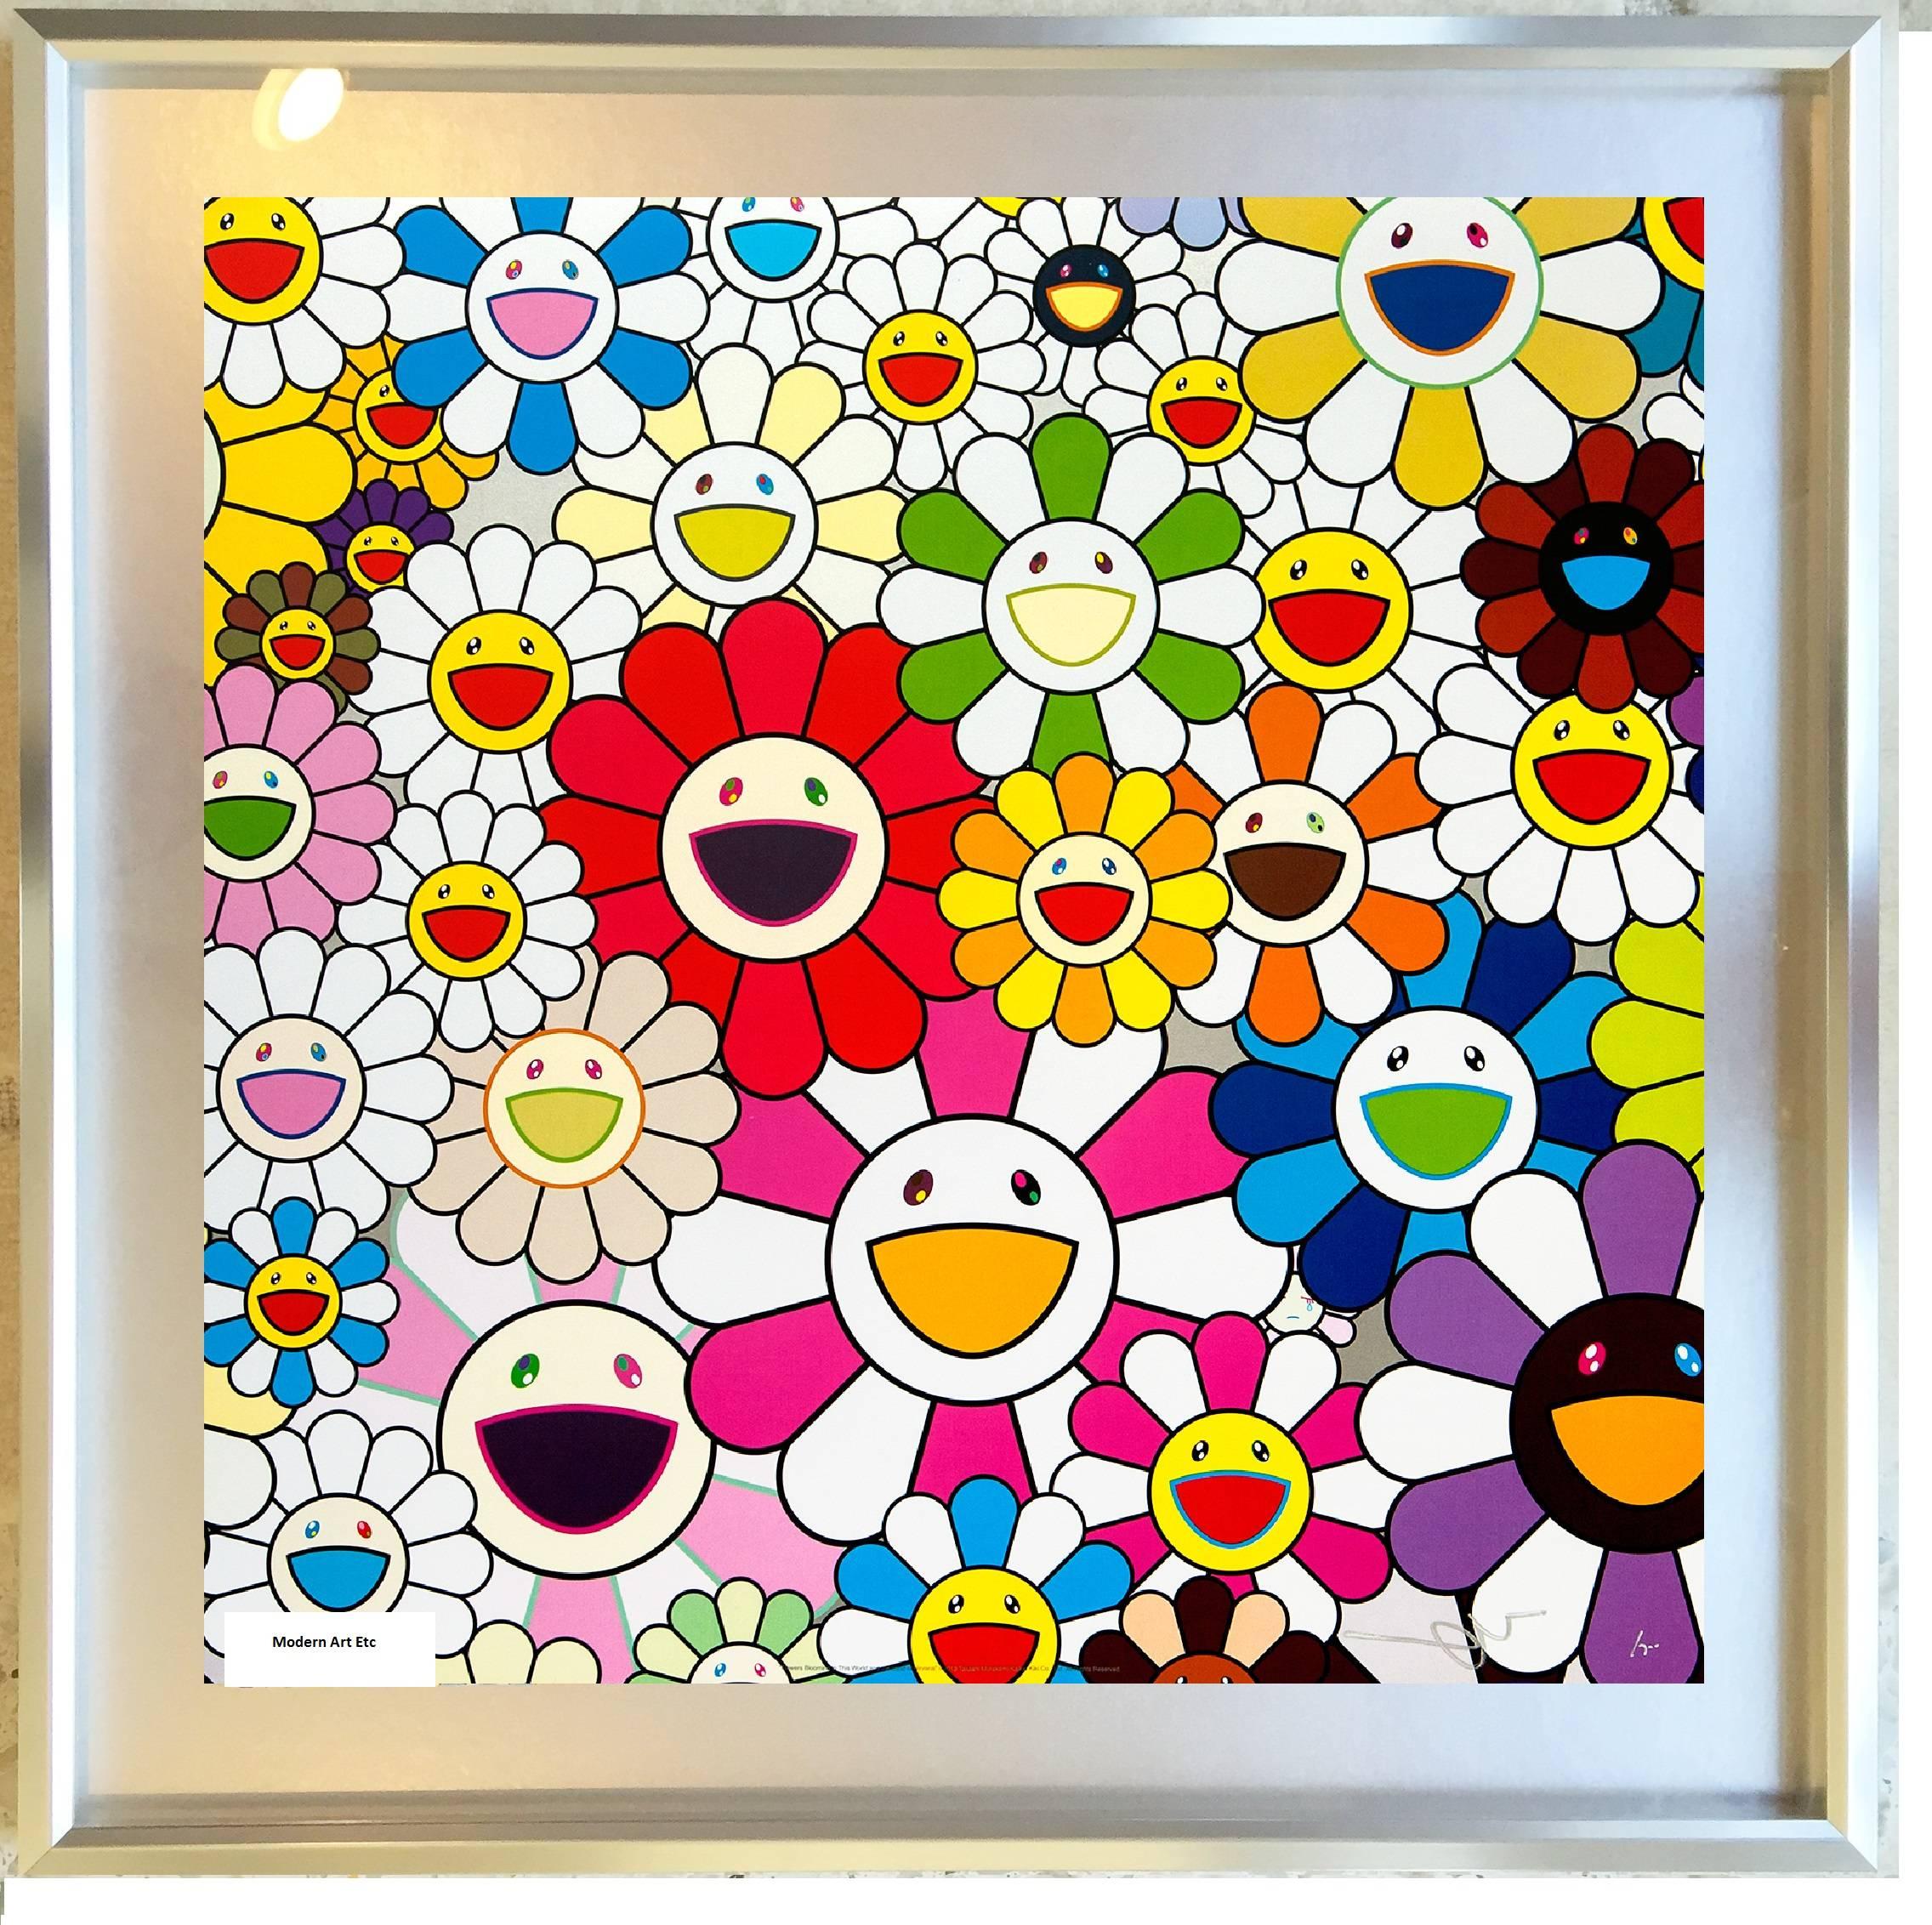 Flowers Blooming in this World and the Land of Nirvana 3 - encadré sur mesure - Contemporain Print par Takashi Murakami